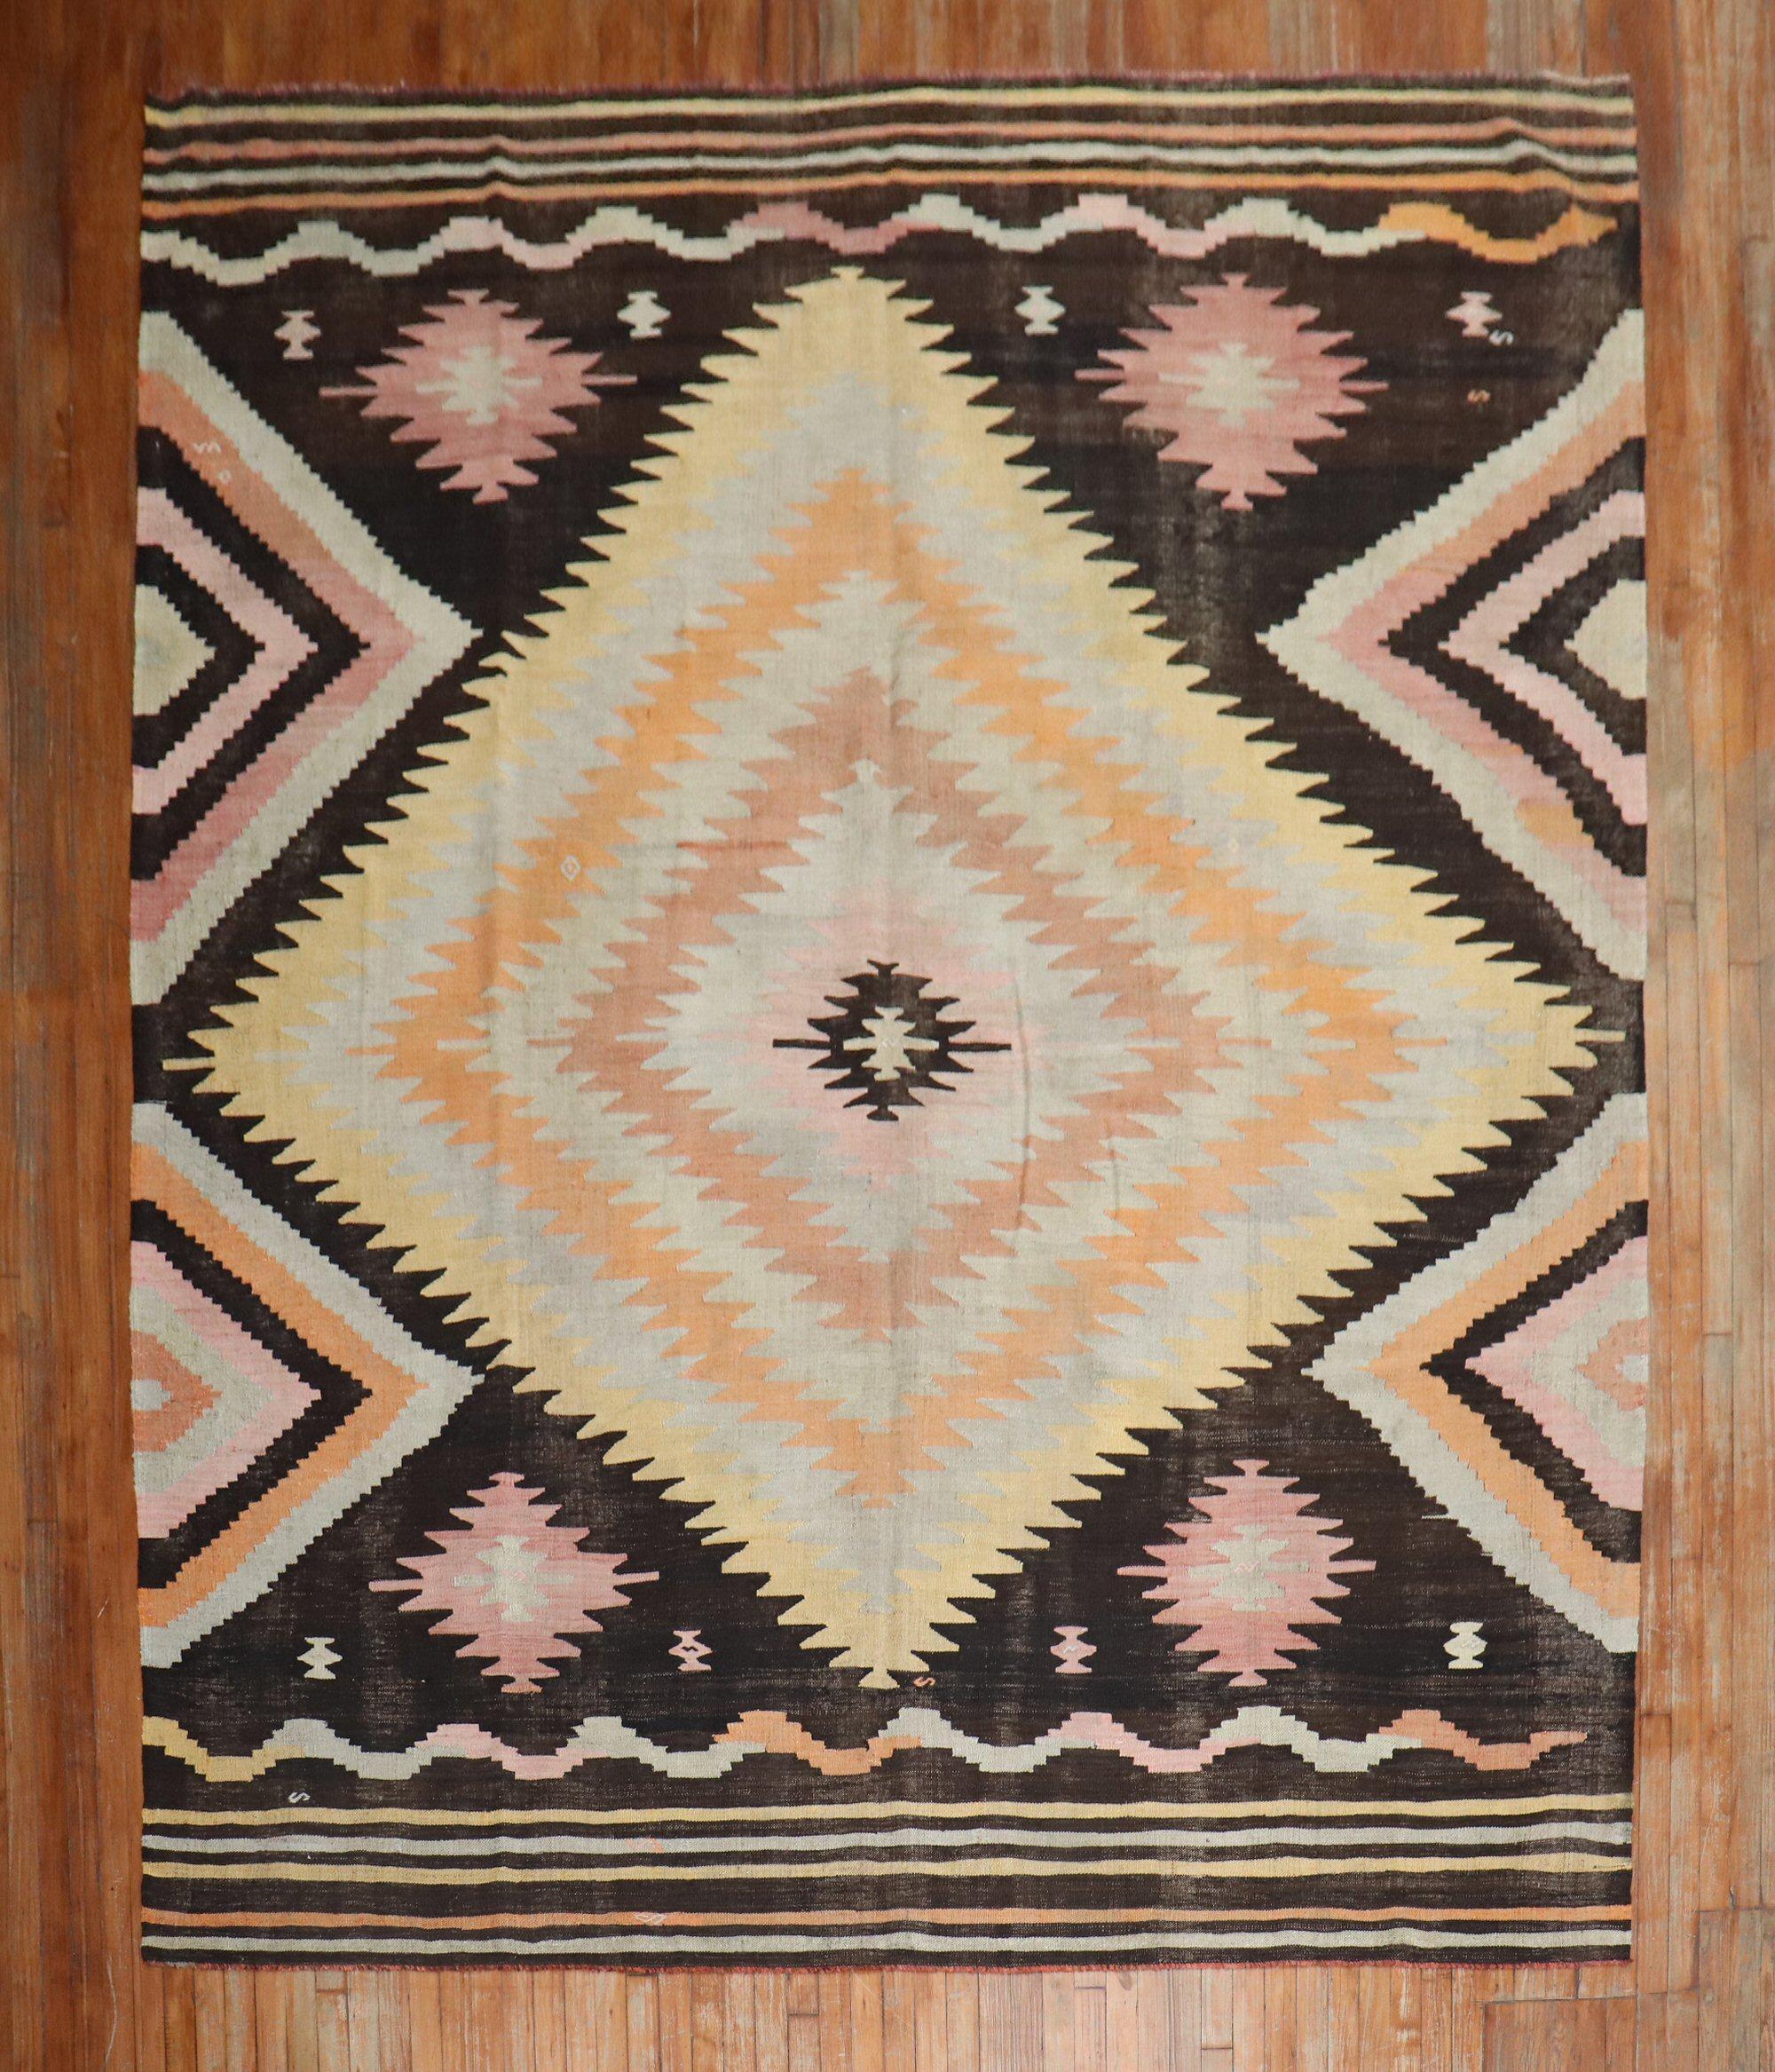 Room size Turkish Kilim from the mid-20th century. The field is brown, accents in canteloupe, peach, light green and lavender.

Measures: 9' x 11'2''.